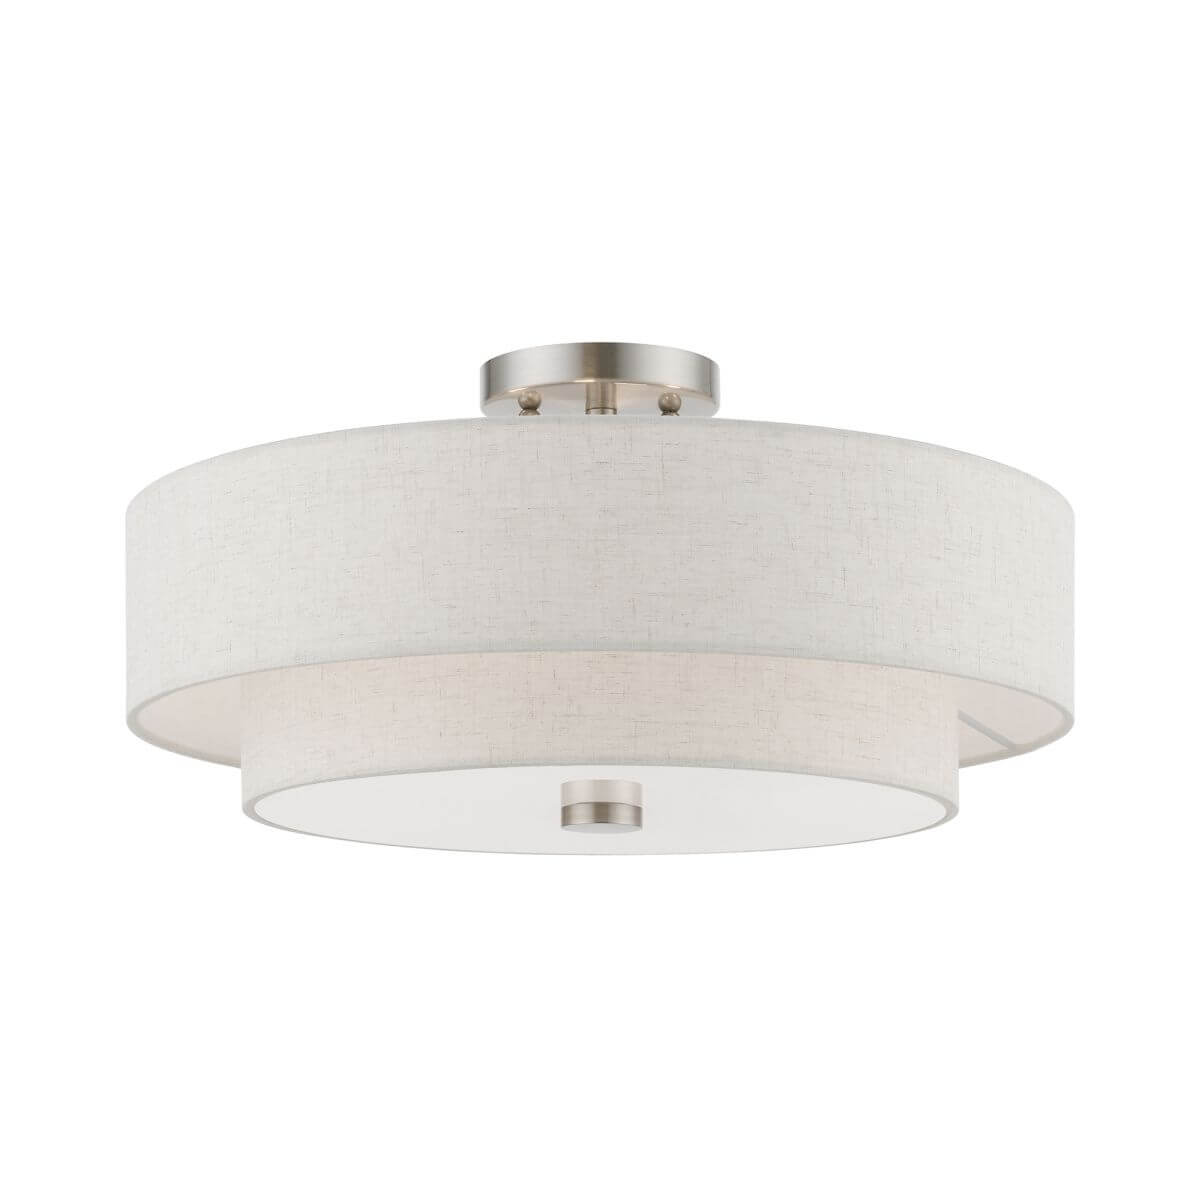 Livex 51085-91 Meridian 4 Light 18 inch Semi-Flush Mount in Brushed Nickel with Hand Crafted Oatmeal Color Hardback Fabric Shade - White Fabric Inside